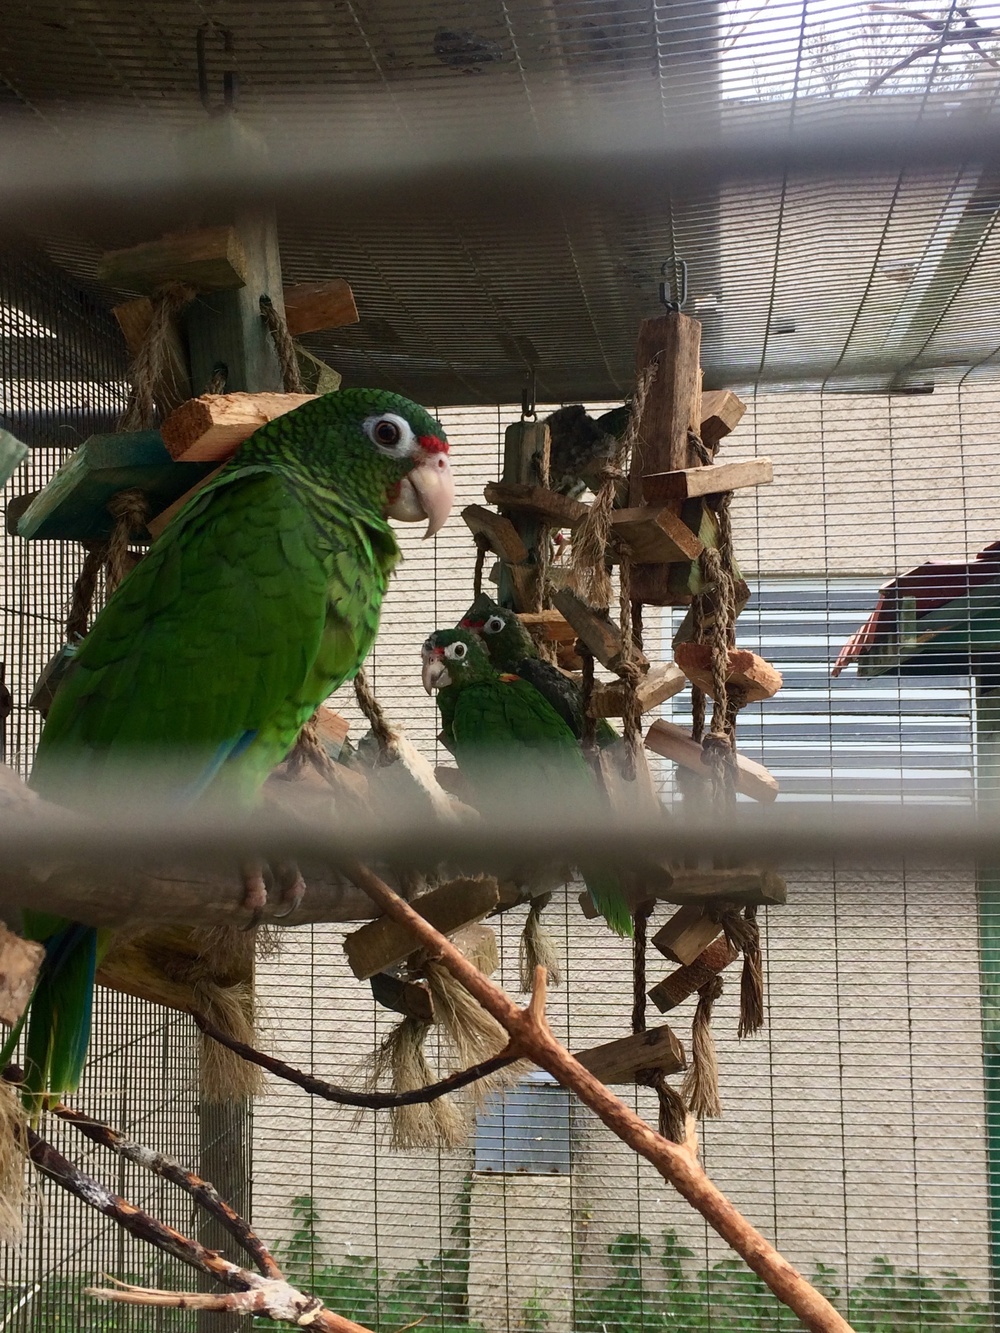 Preserving the Puerto Rican parrot